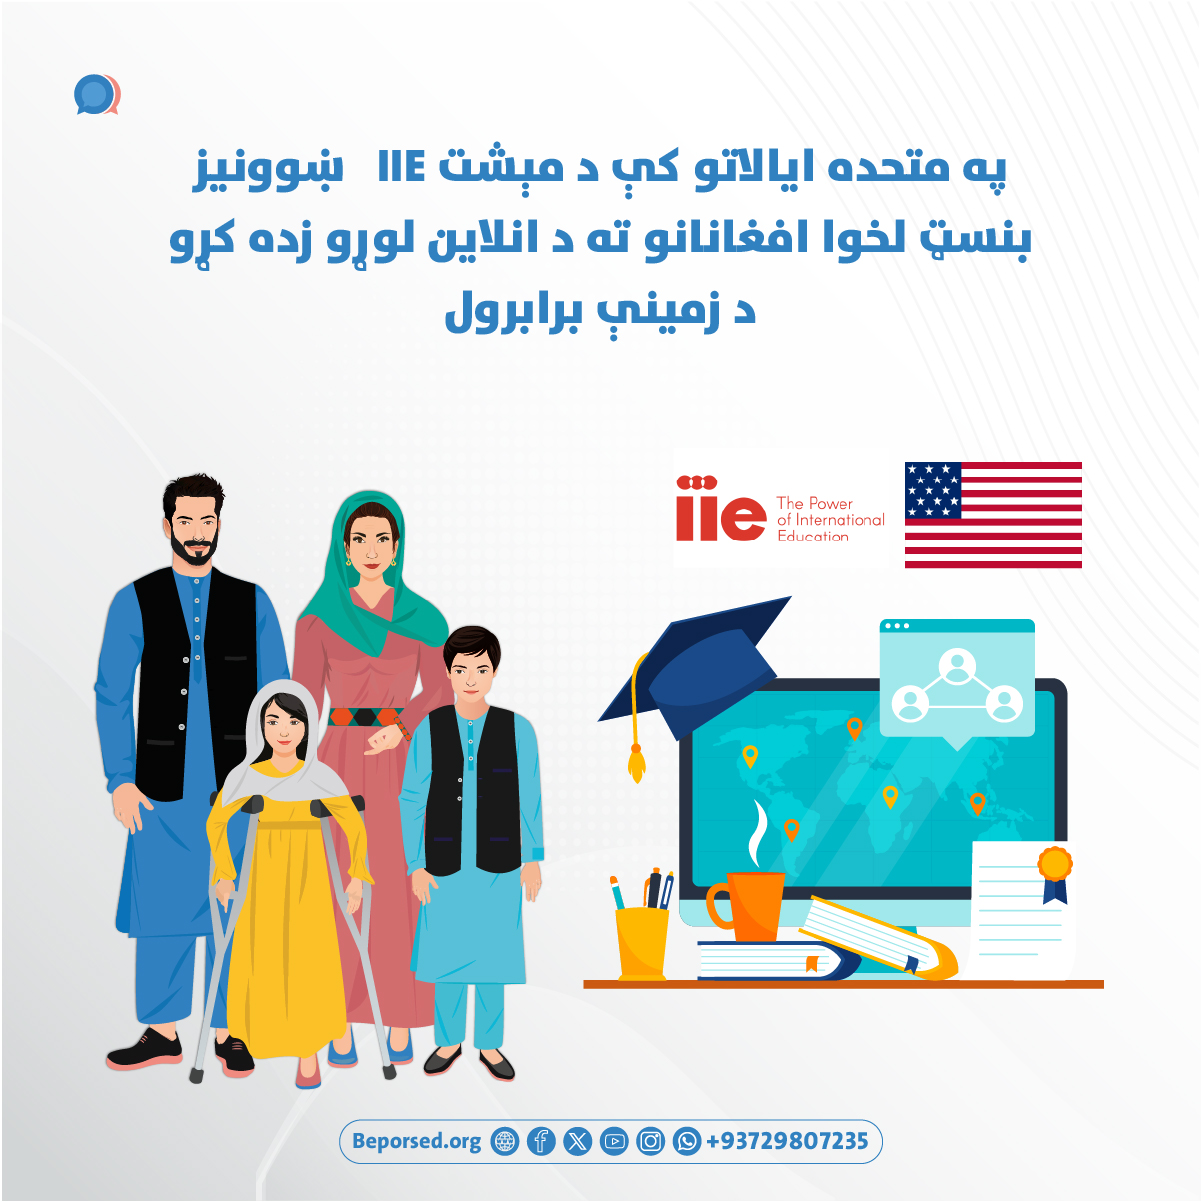 Supporting Access to Online Higher Education for Afghans by U.S.-based IIE 02.jpg